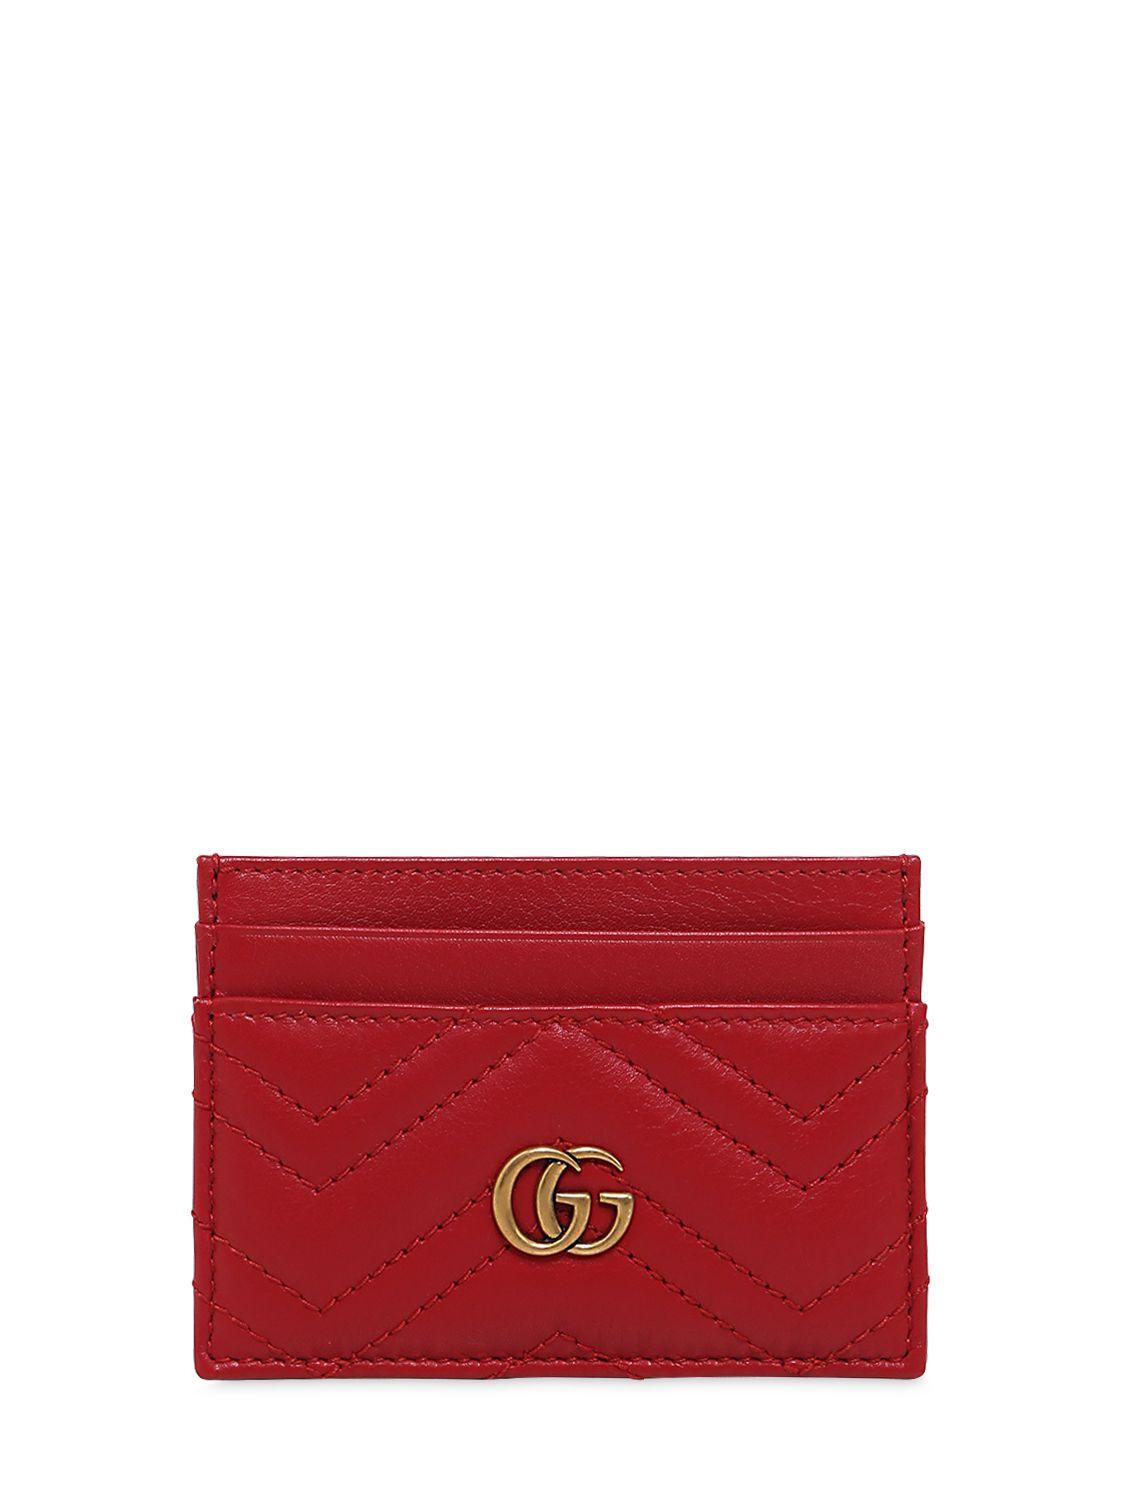 Gucci GG Marmont Leather Card Holder in Red - Lyst